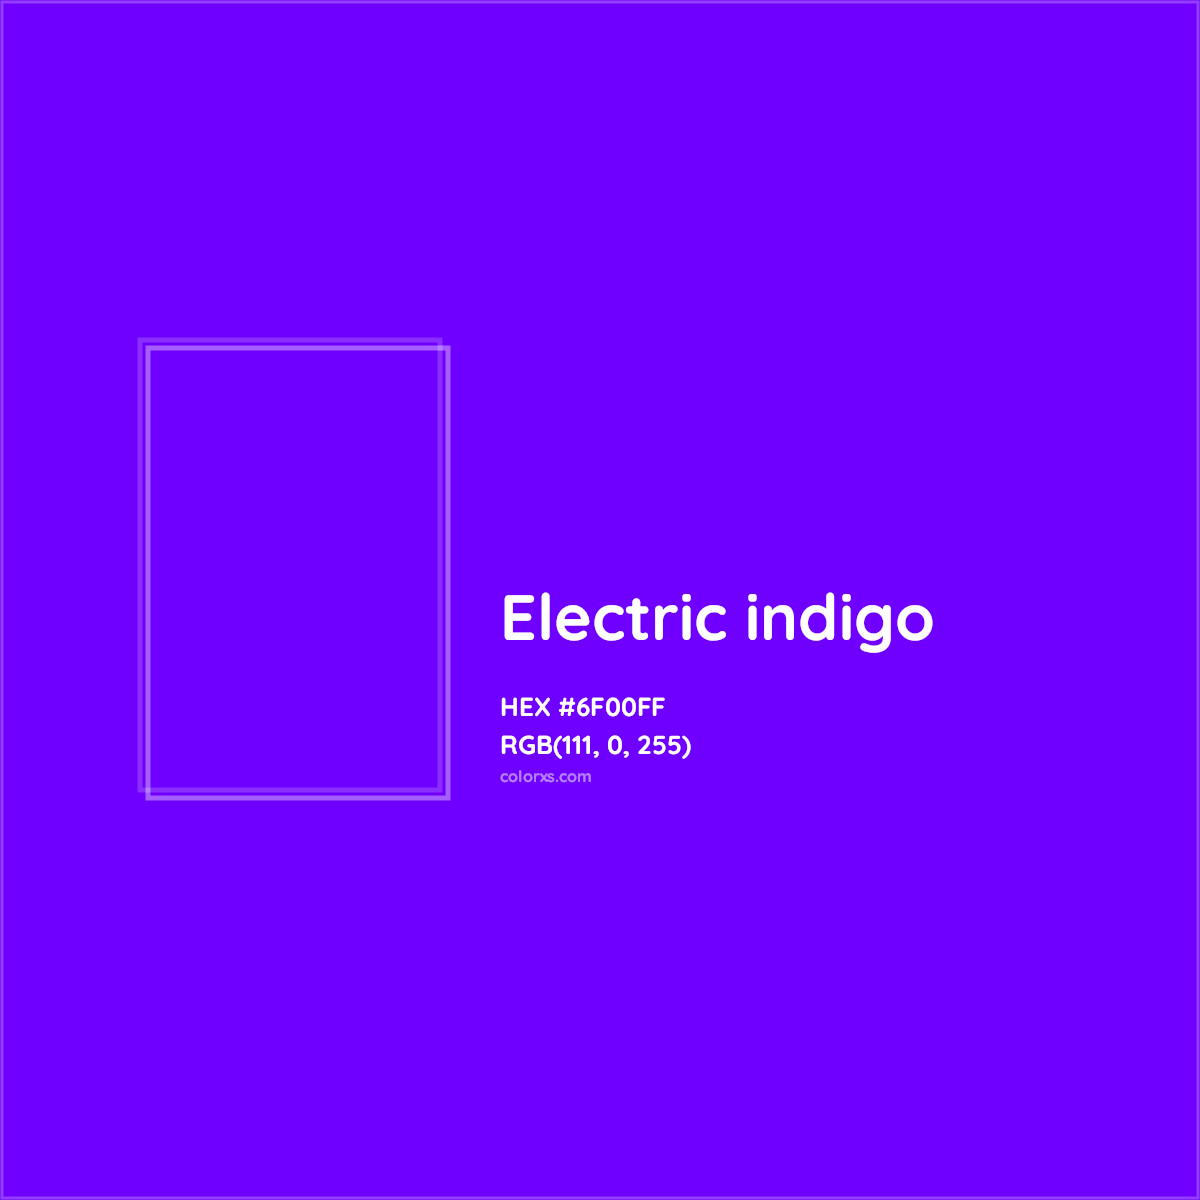 About Electric indigo - Color meaning, codes, similar colors and ...